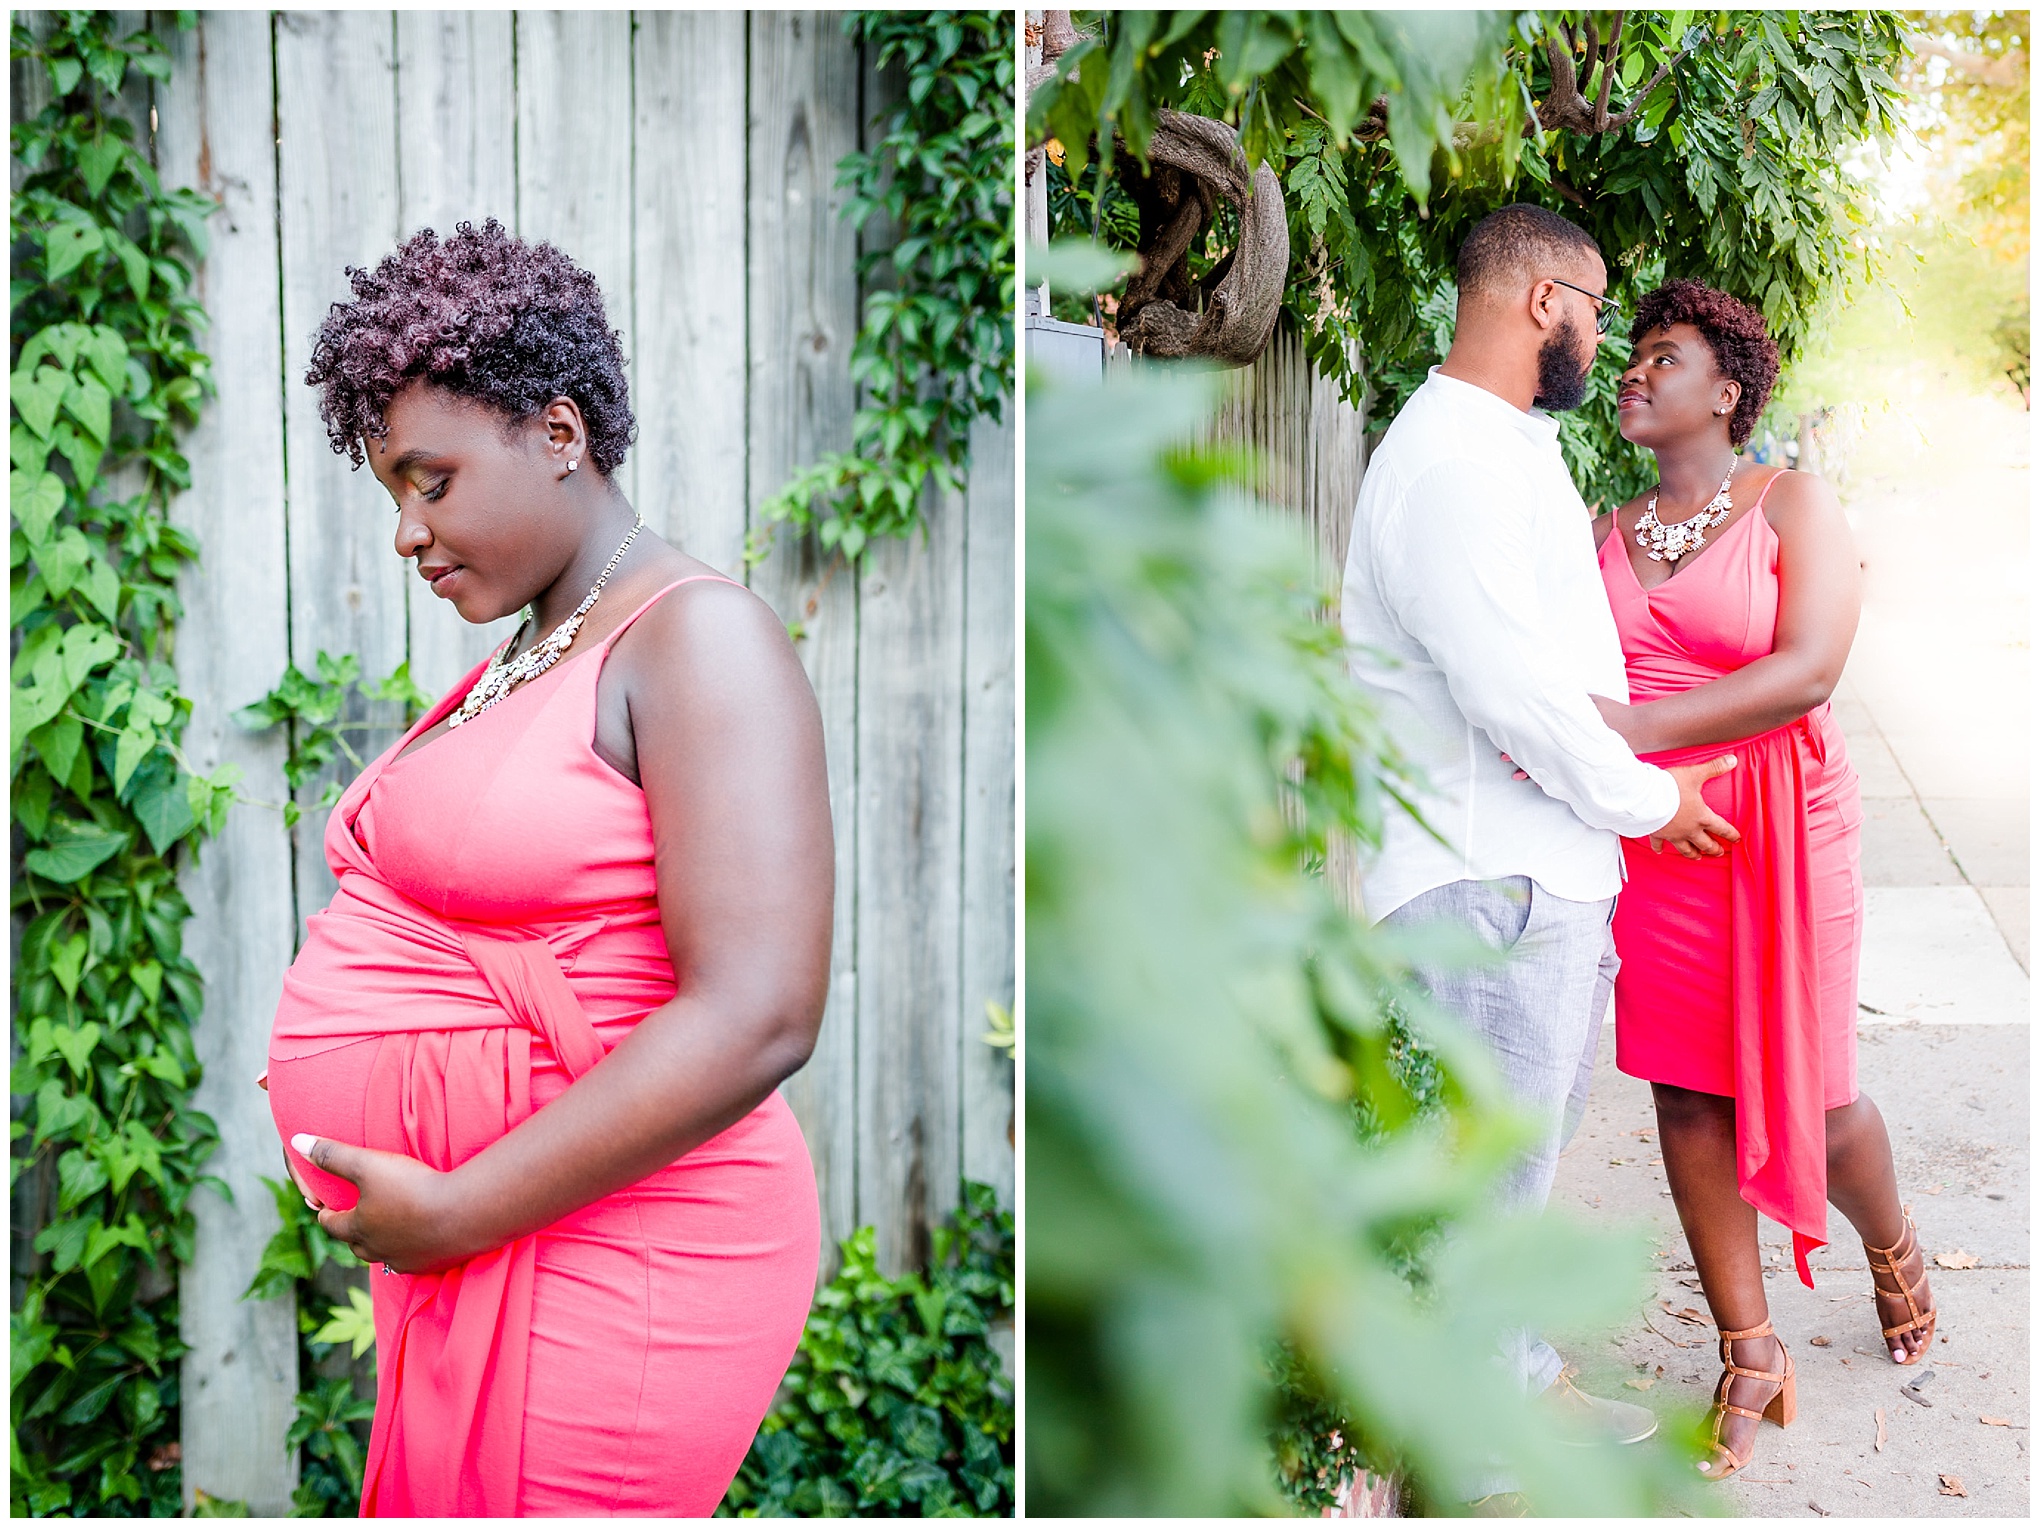 Wilkes Street Tunnel maternity photos, maternity style, coral dress, married couple, mom to be, dad to be, old town Alexandria, northern Virginia, maternity photographer, Alexandria maternity photographer, magic hour portraits, baby bump